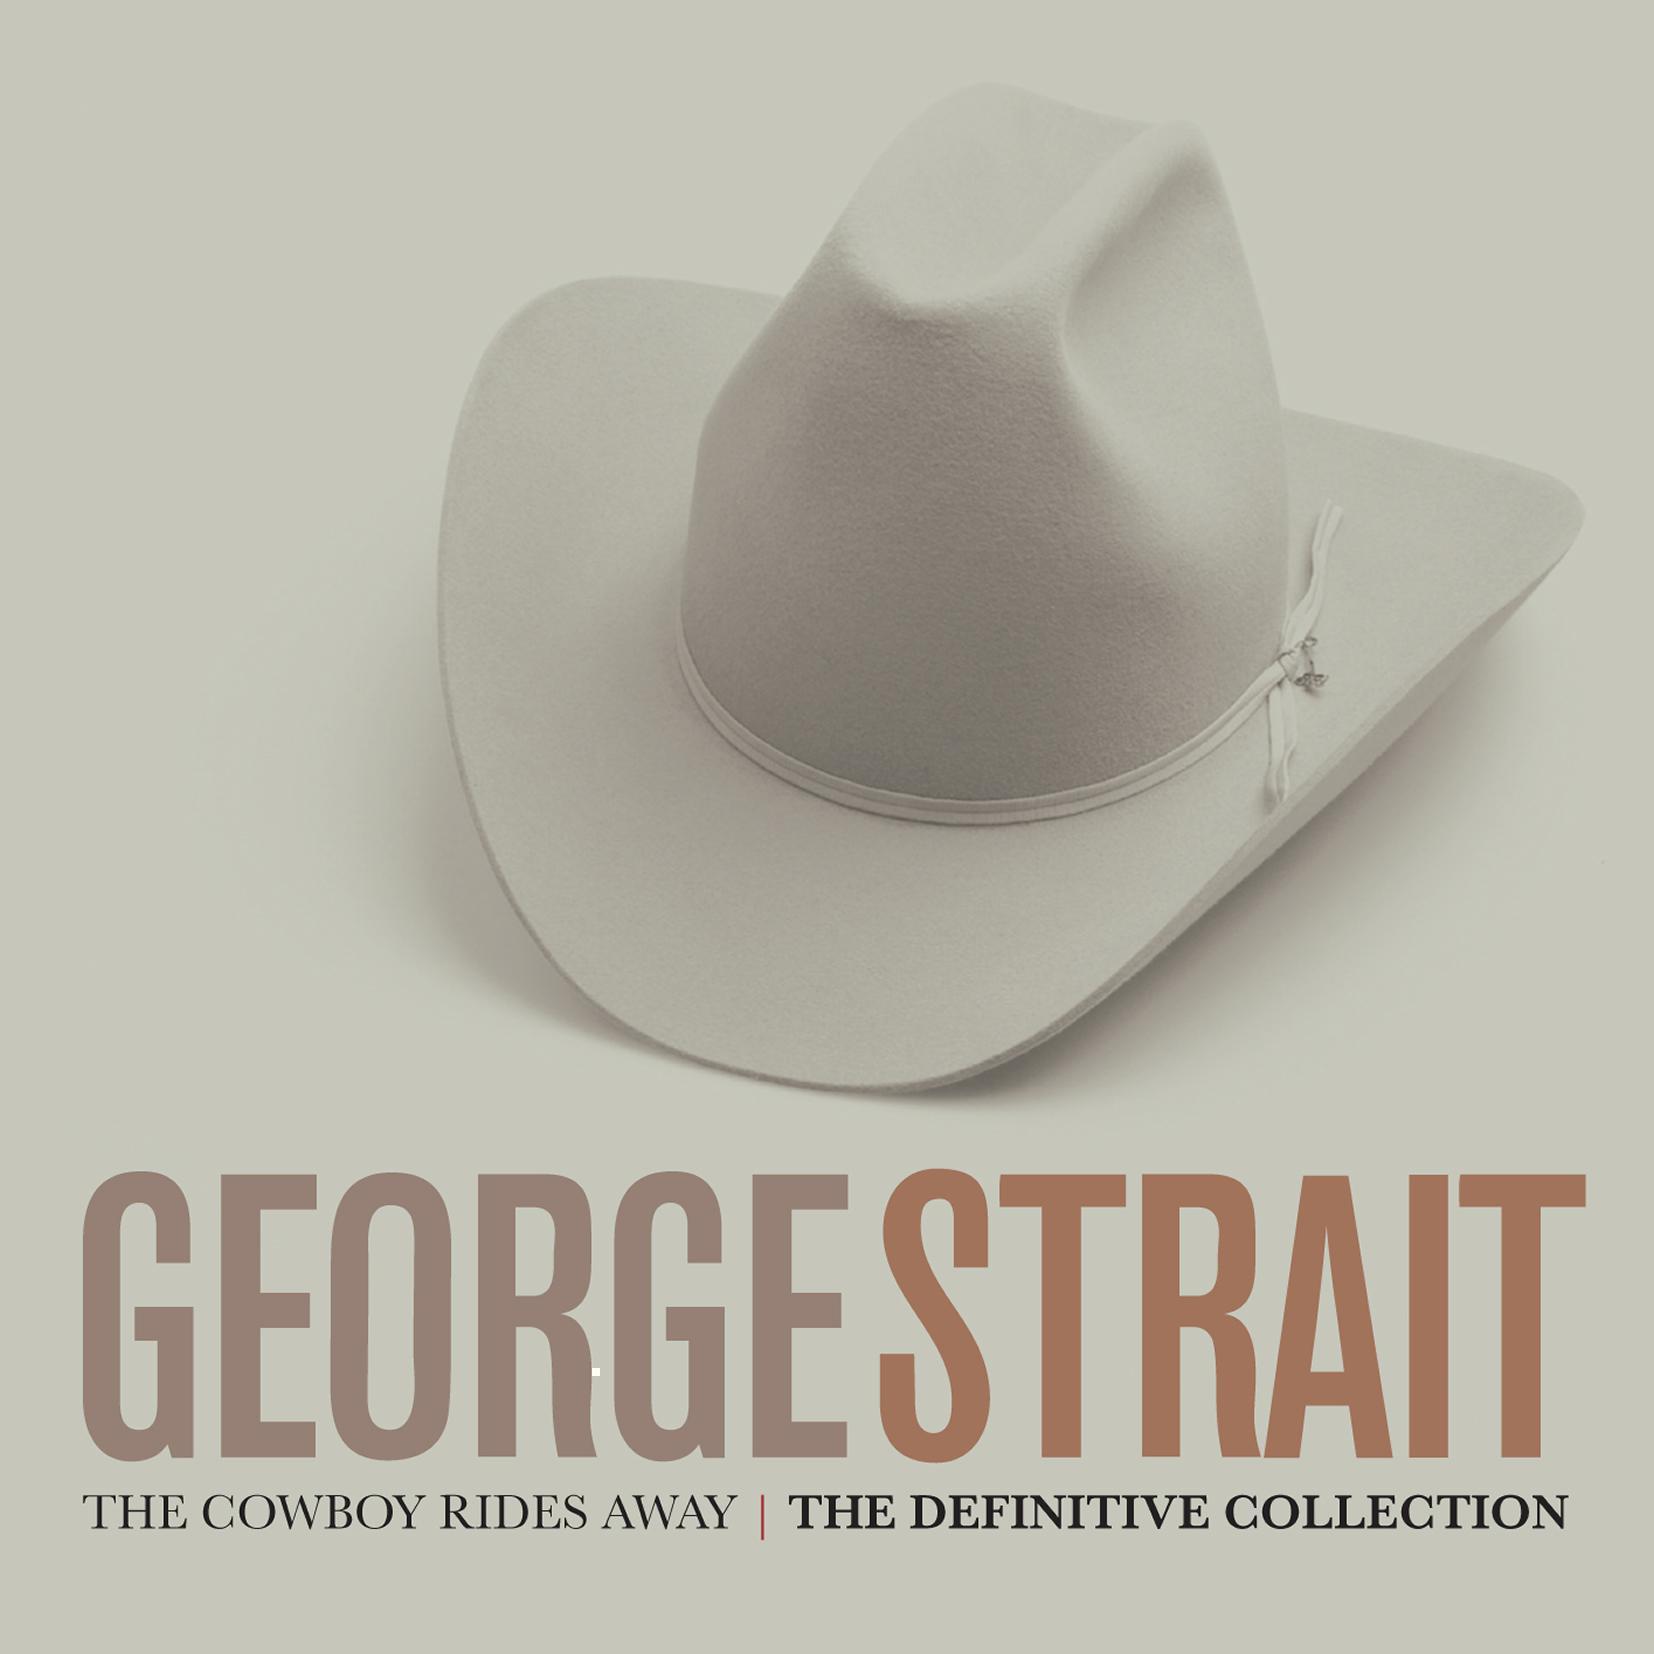 The Cowboy Rides Away: The Definitive Collection